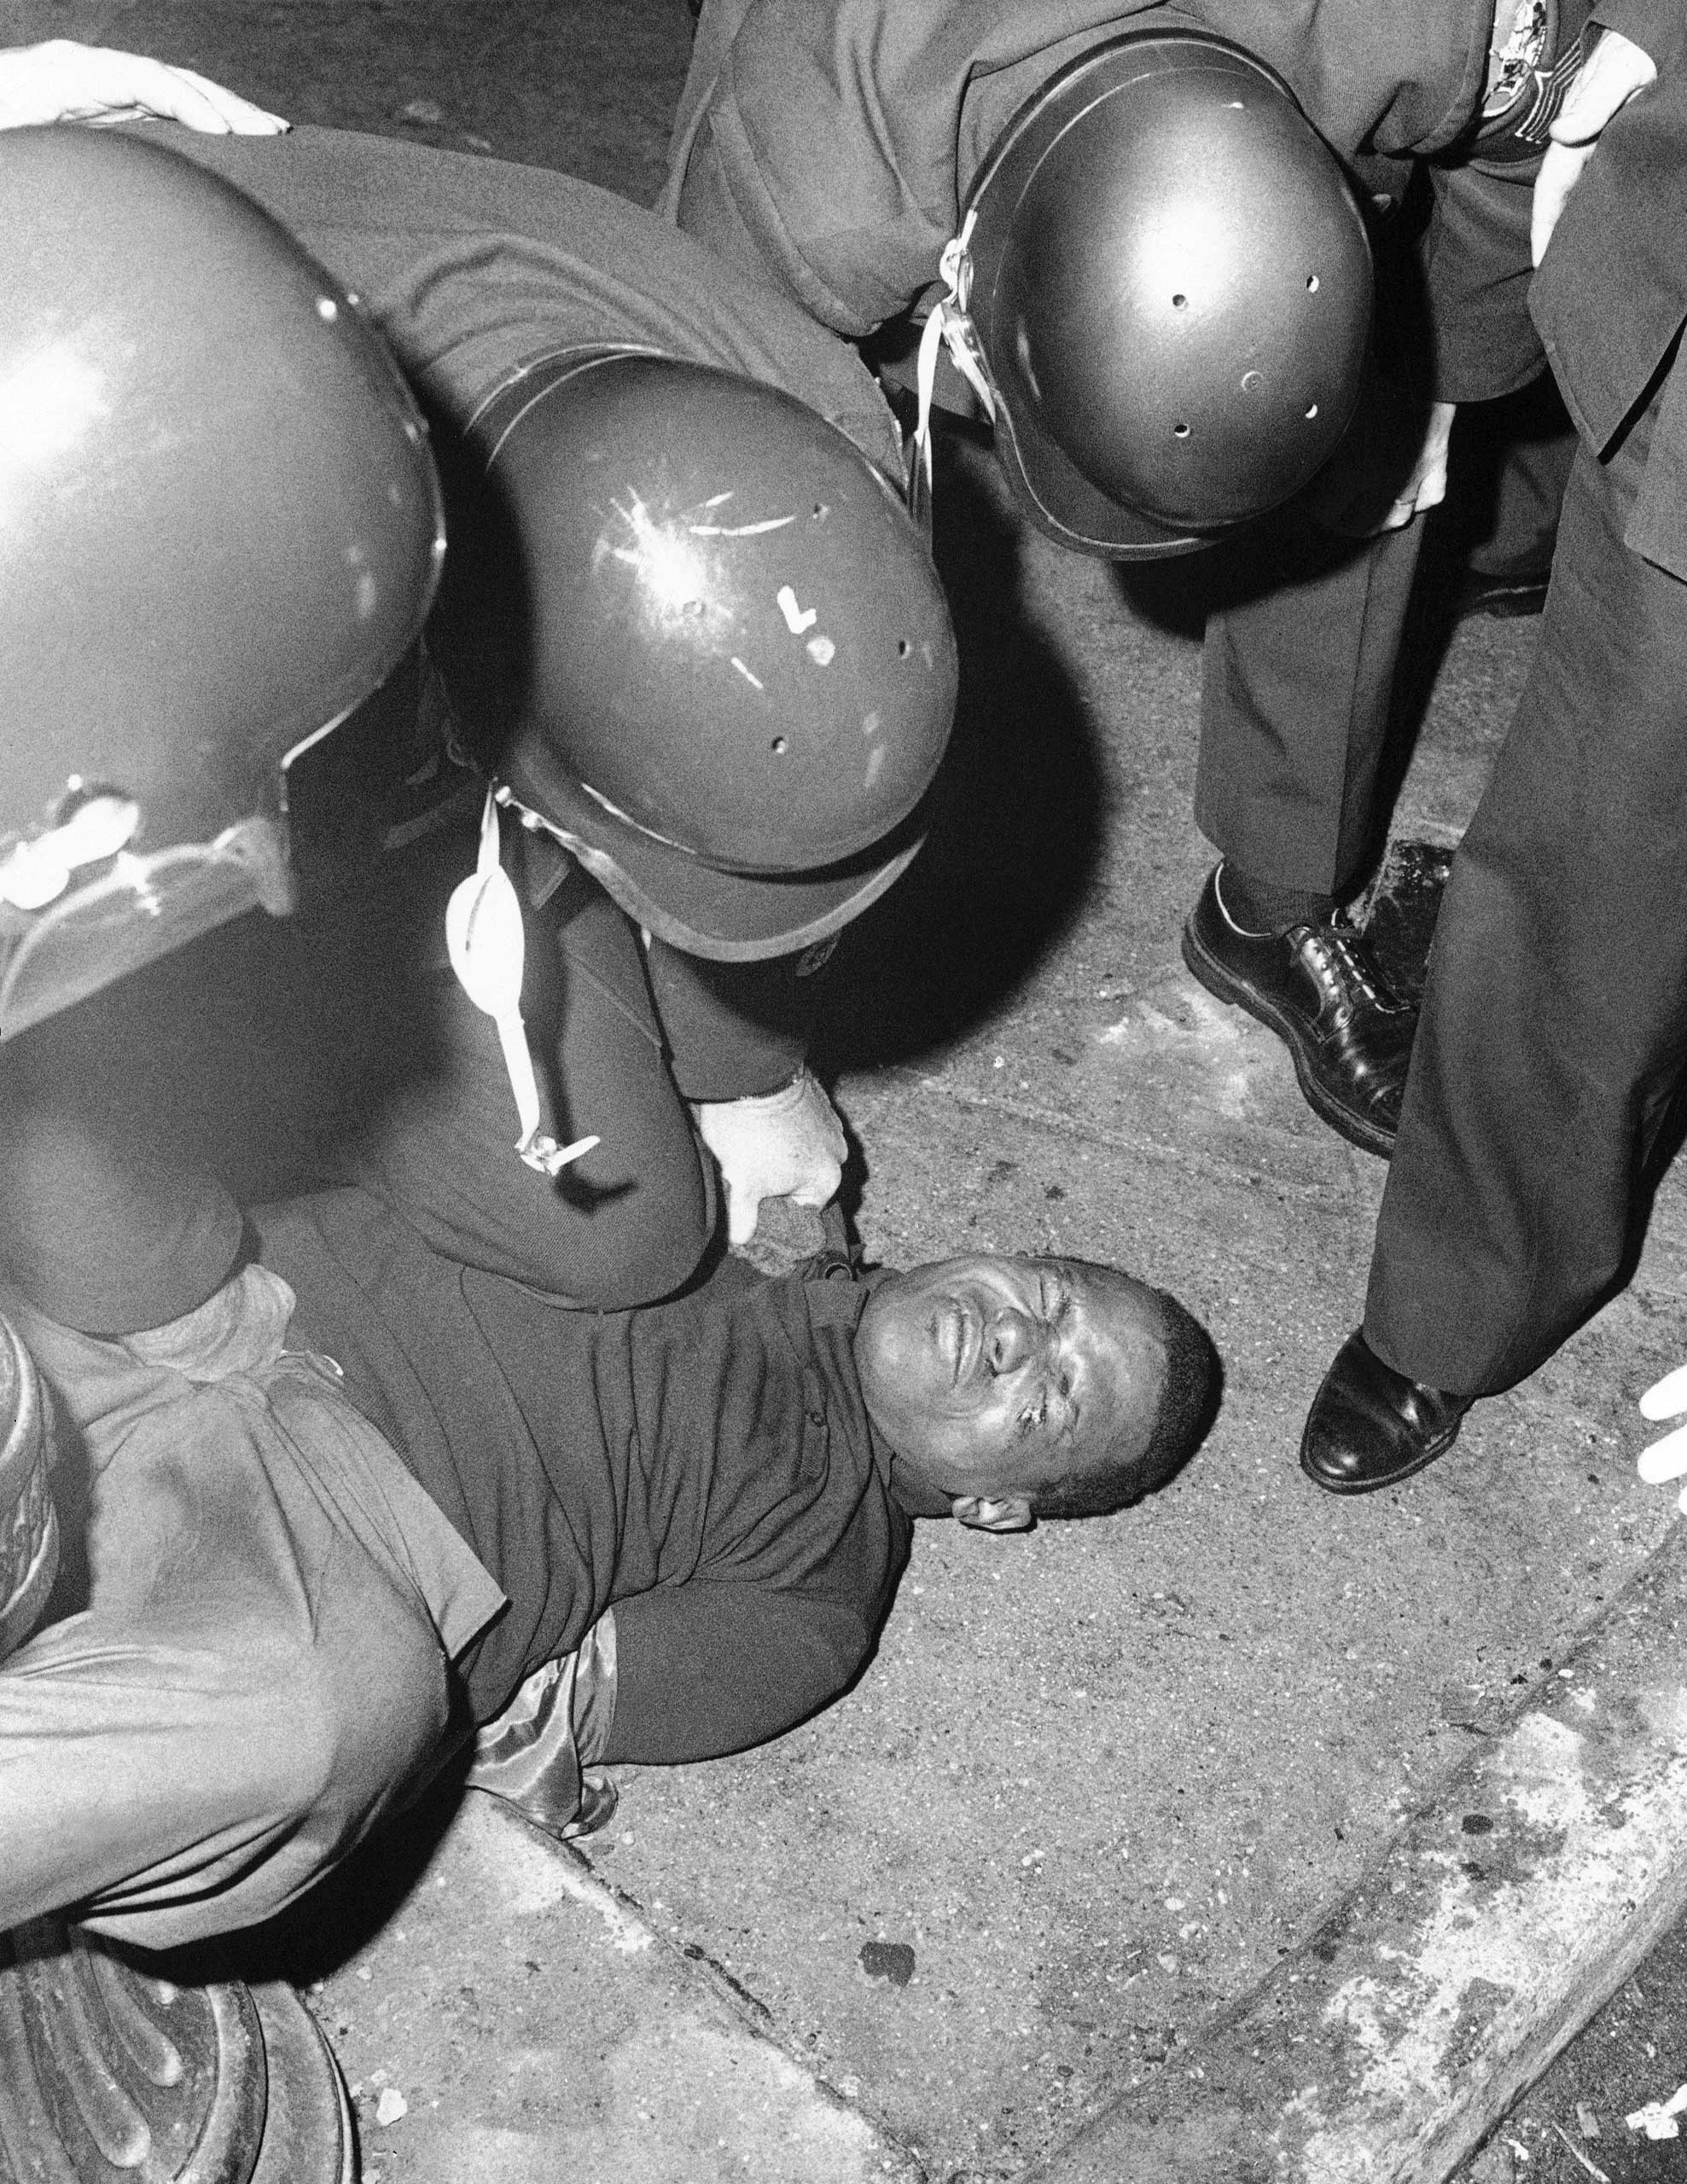 Baltimore City police pin down a curfew breaker in Baltimore on April 9, 1968.